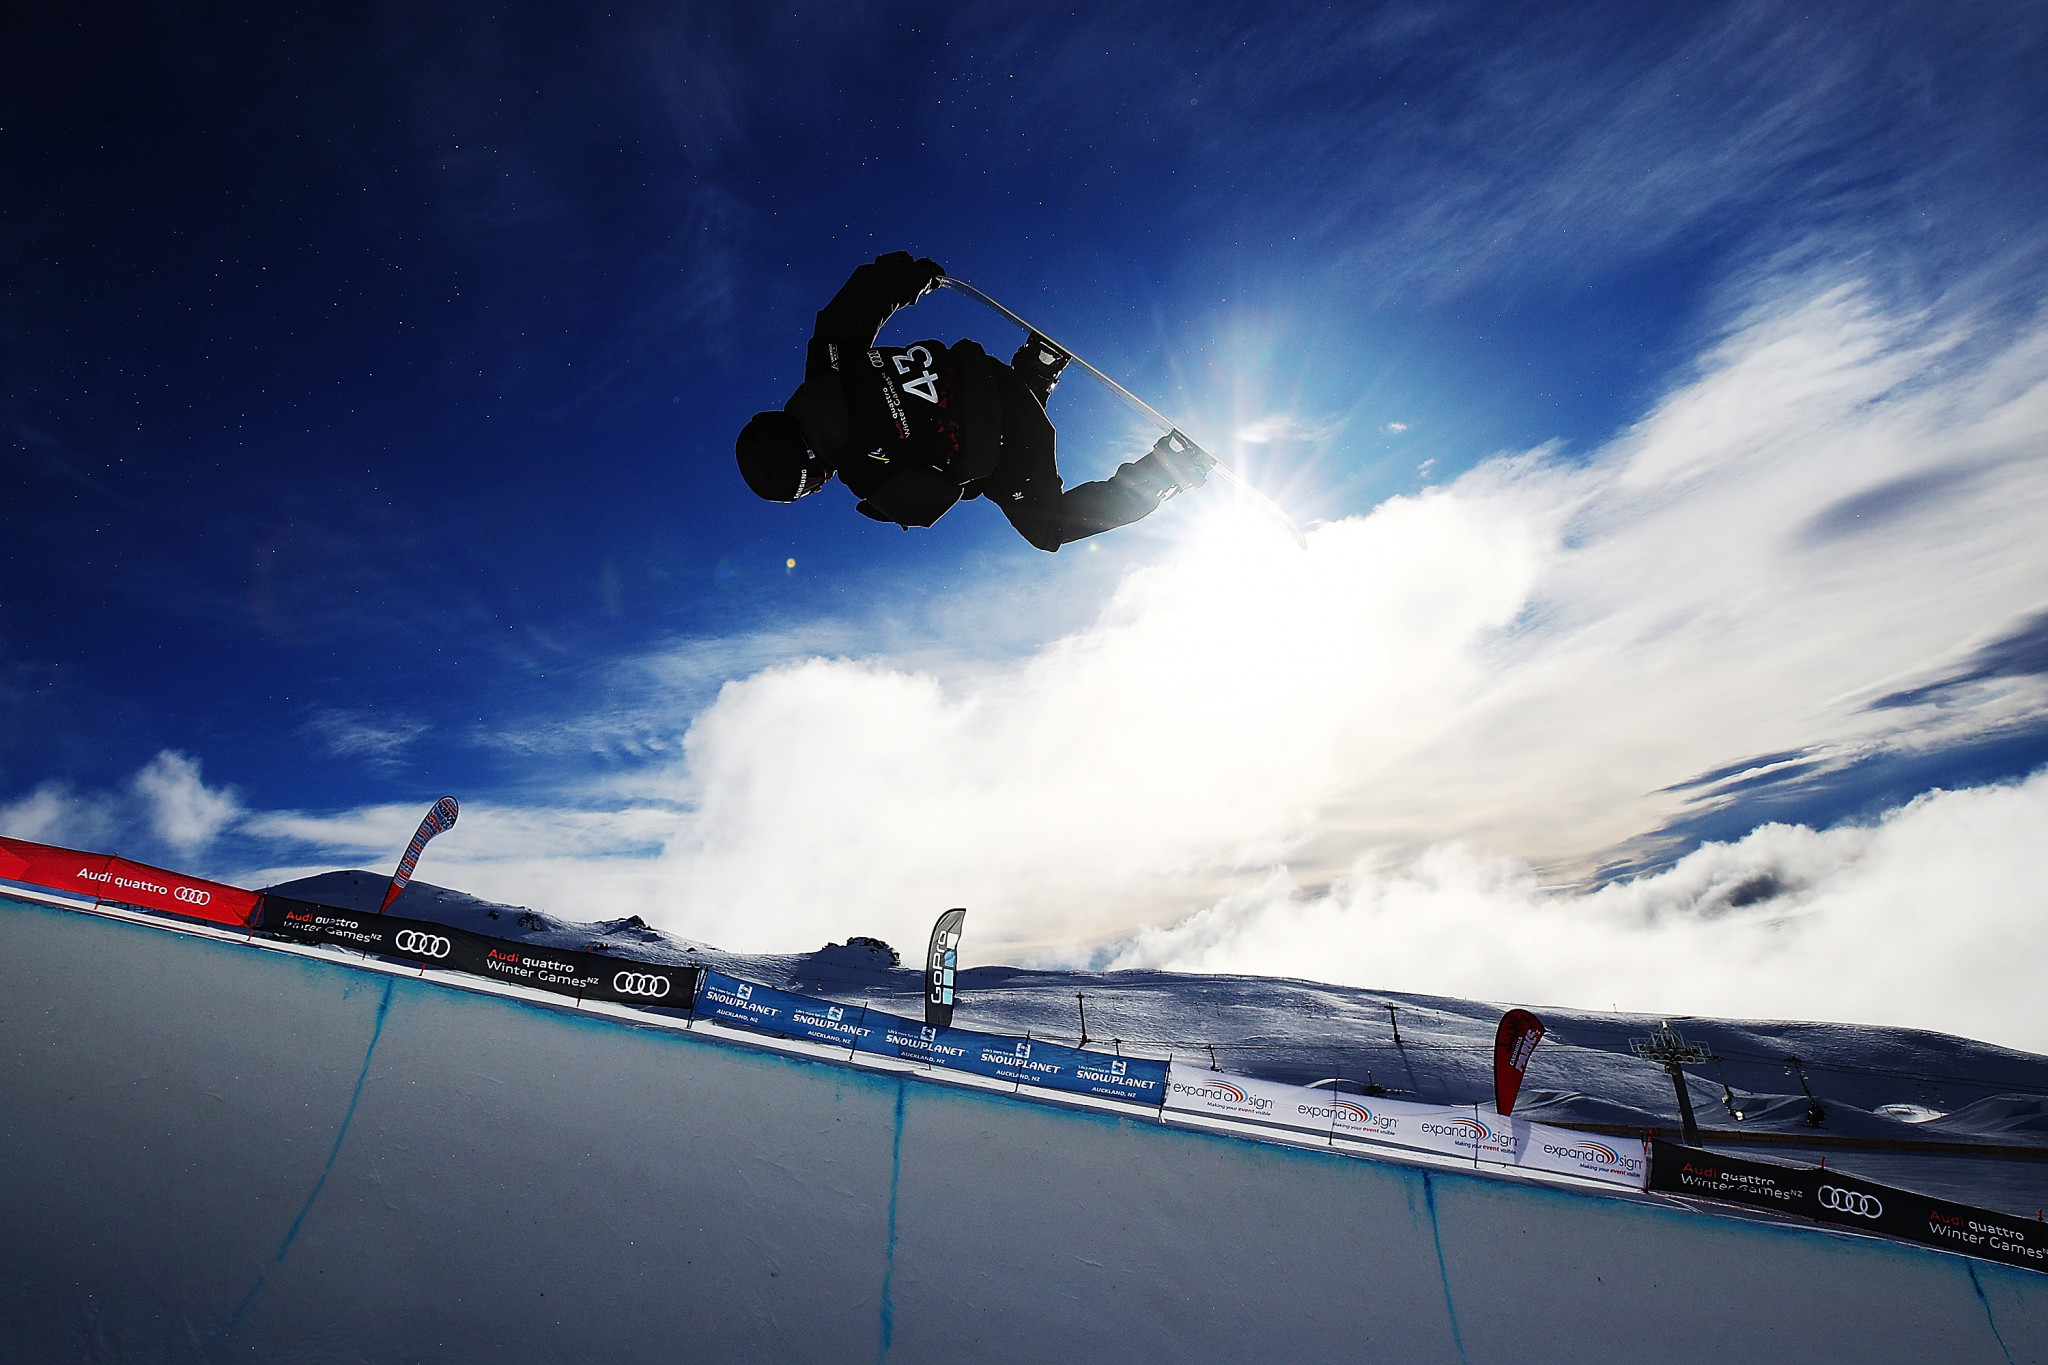 New Zealand to host FIS Junior Freestyle Ski and Snowboard World Championships